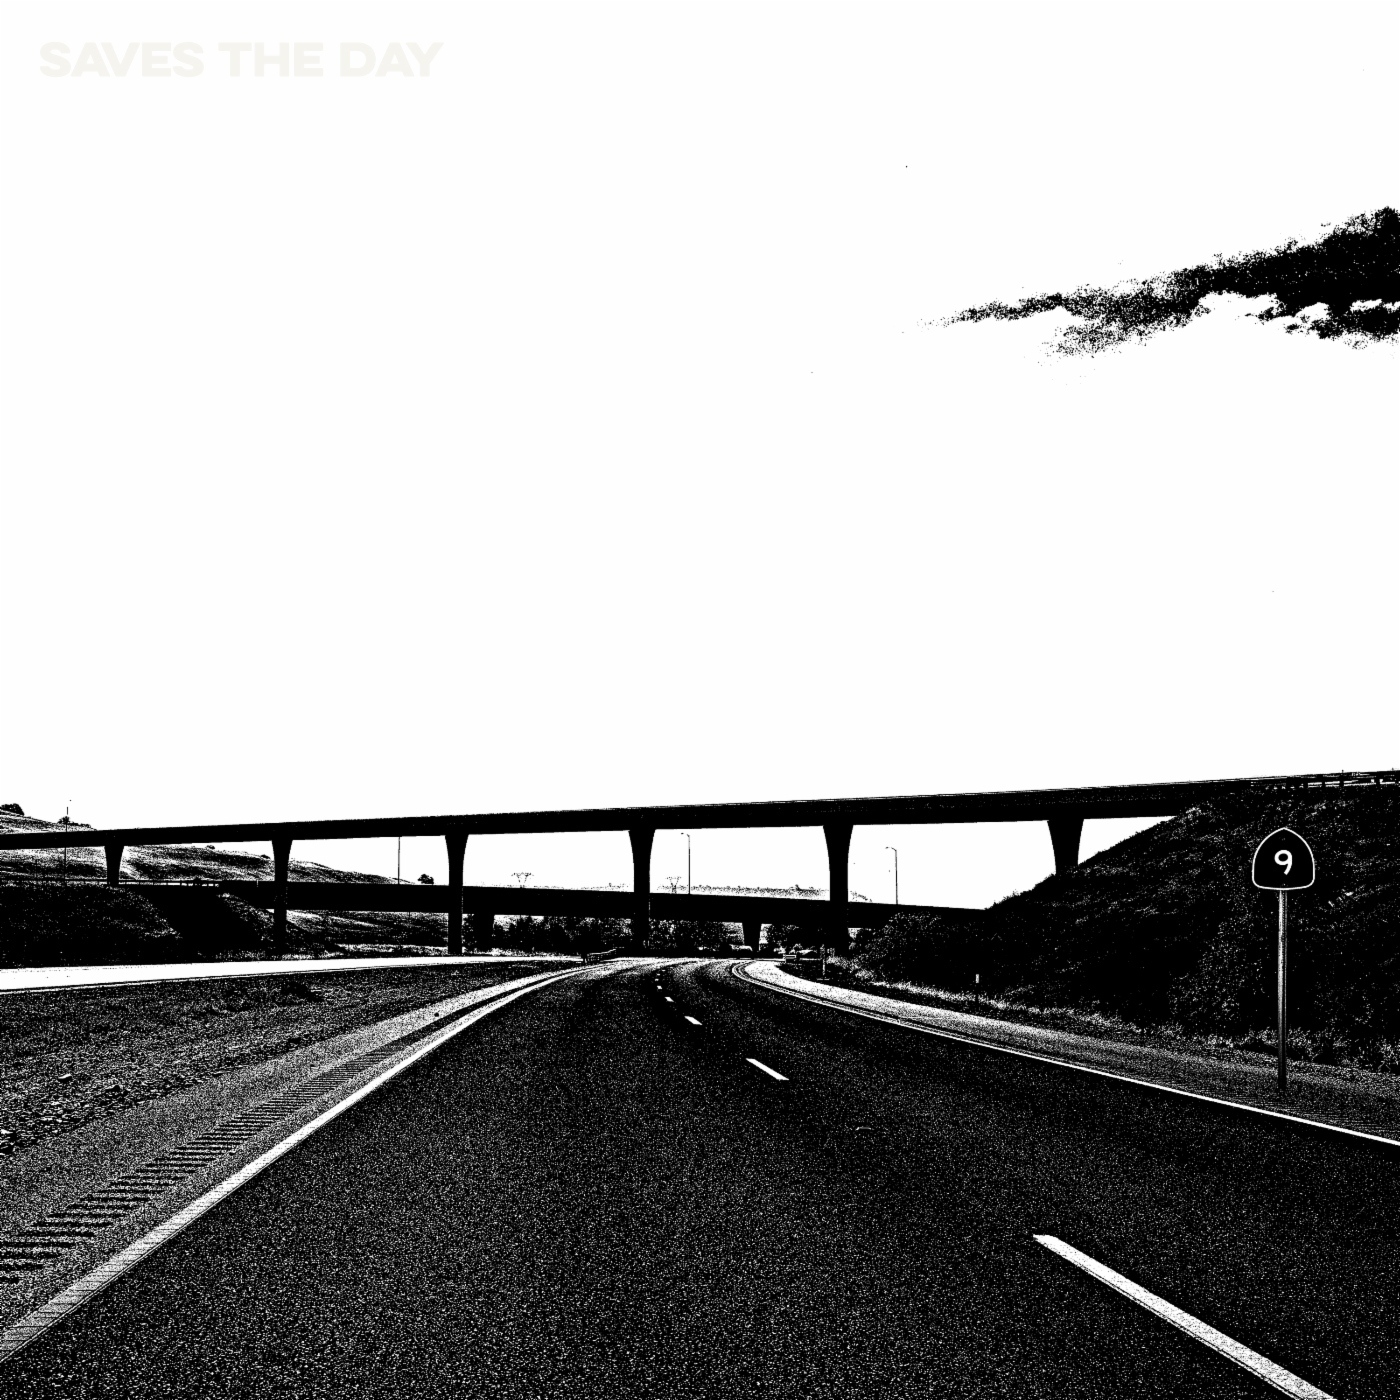 Saves The Day - 9 (2018)